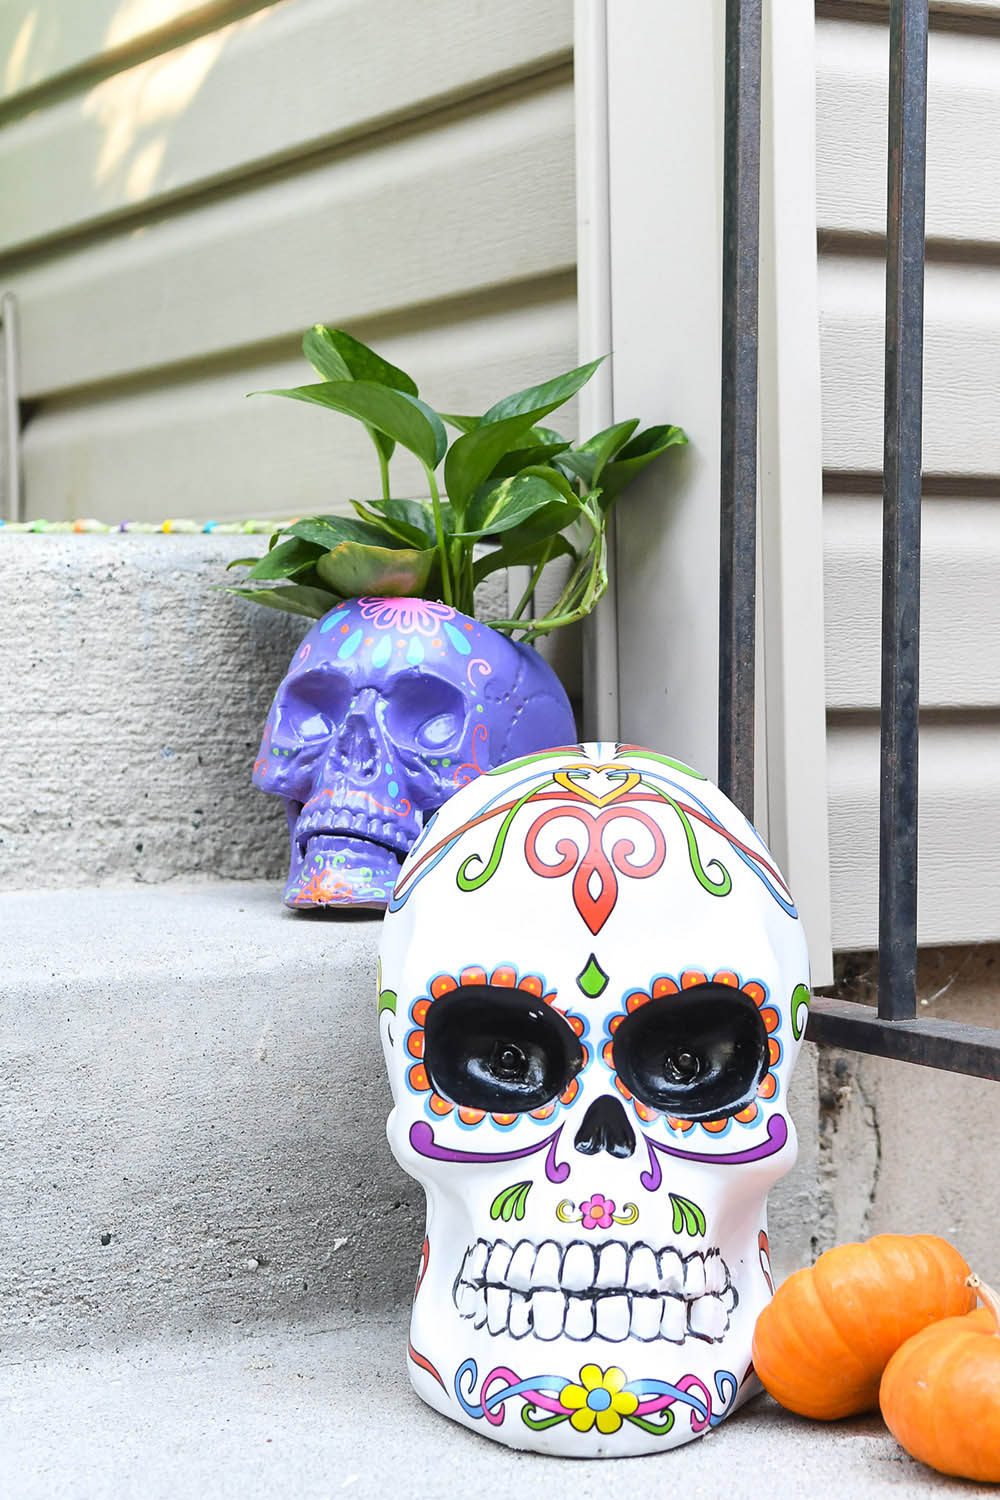 A white light up sugar skull displayed in front of a purple sugar skull.